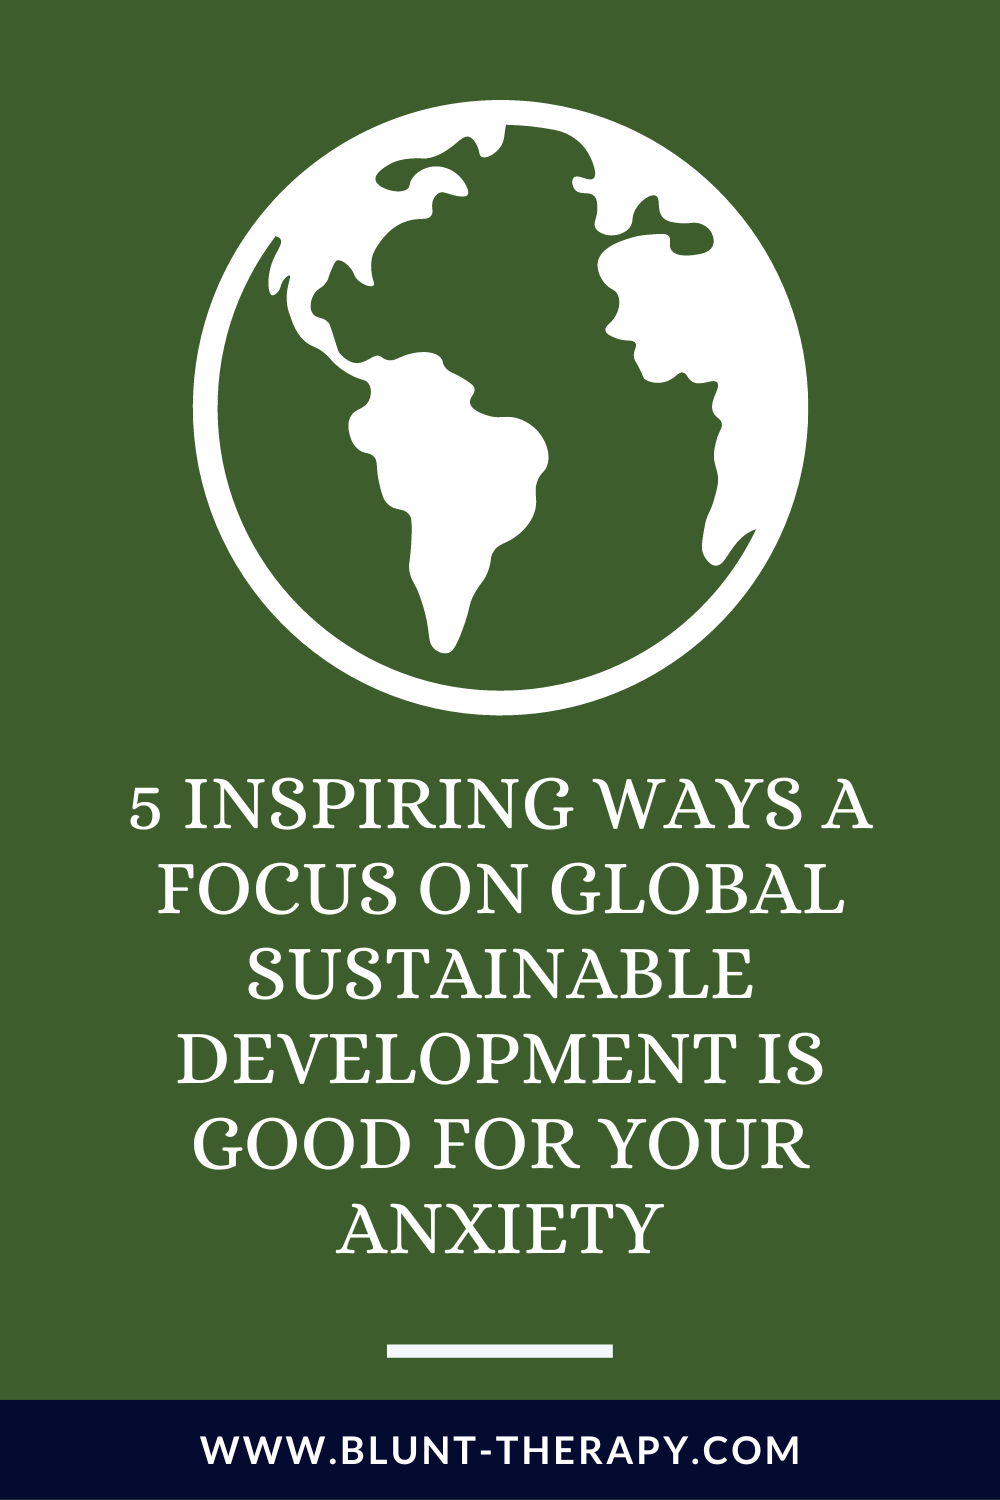 5 Inspiring Ways a Focus on Global Sustainable Development Is Good for Your Anxiety